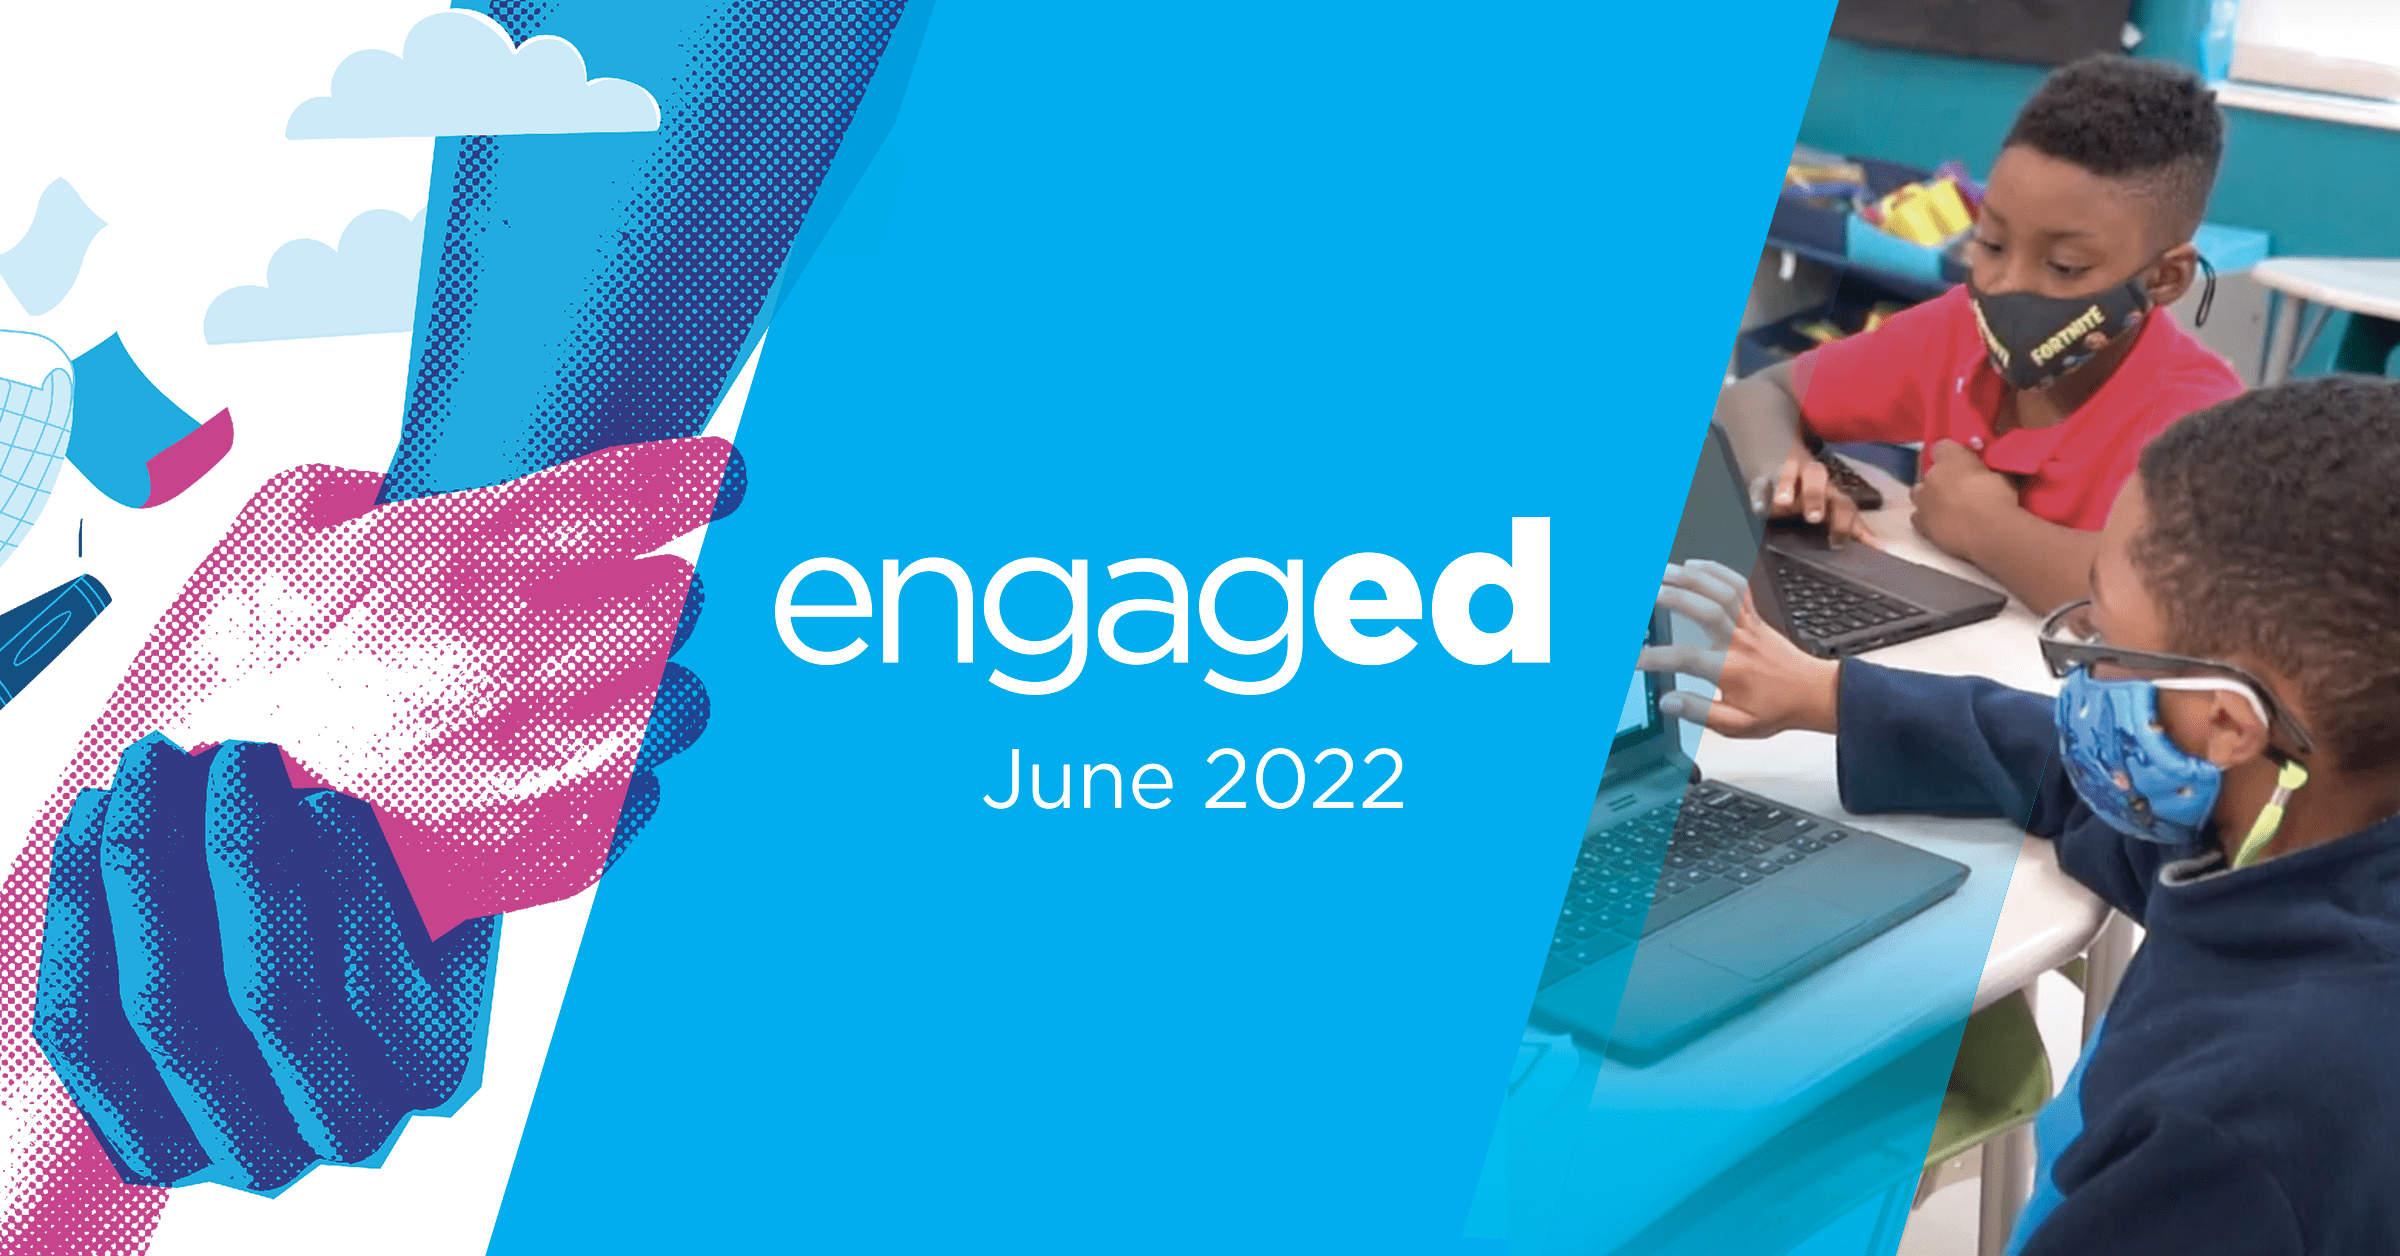 engaged june 2022 newsletter image for engage2learn